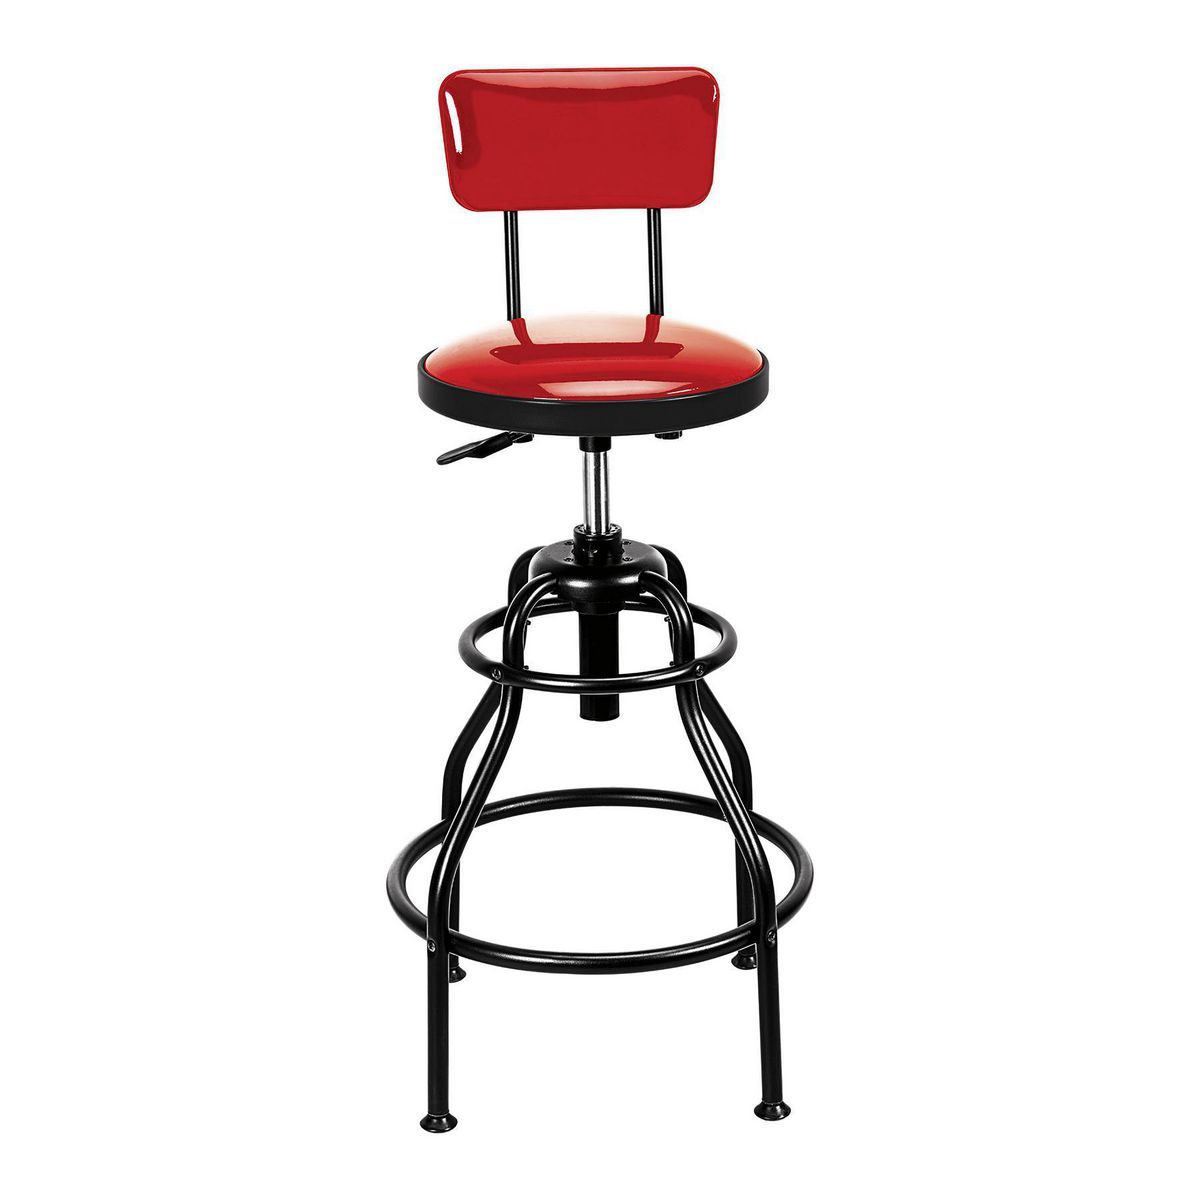 PITTSBURGH AUTOMOTIVE Adjustable Shop Stool with Backrest, Red